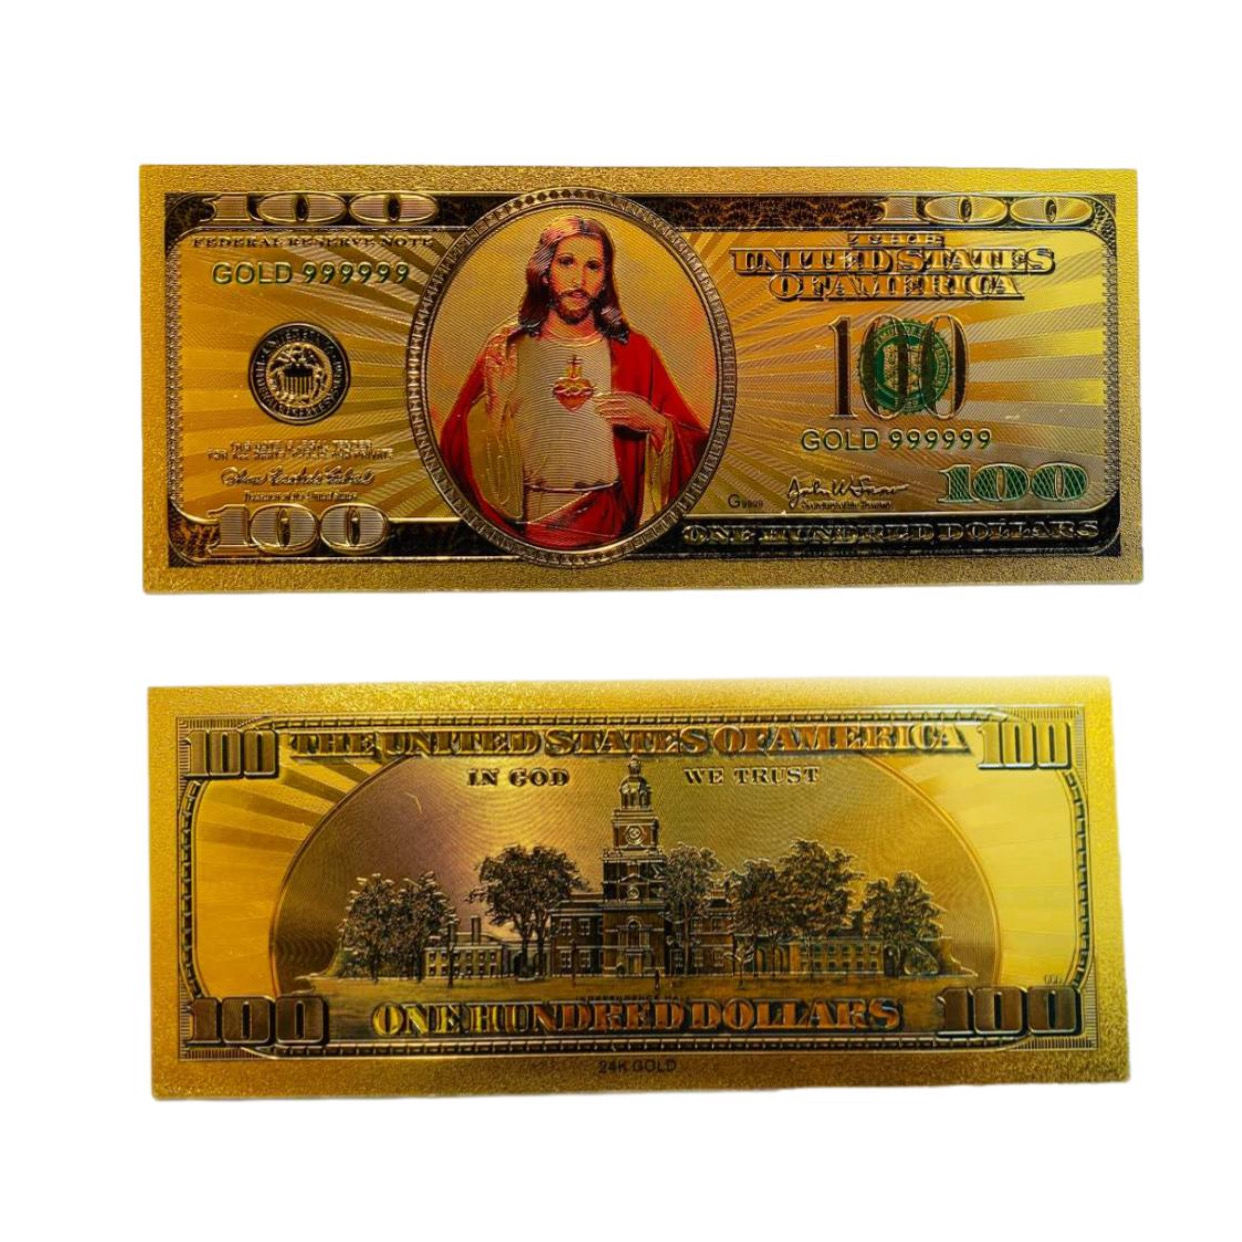 Jesus Christ Image in One Hundred Dollars 24k Gold Plated Bill Collectible Banknotes for Decoration 24K Gold and Silver Plated Replica Bills 5